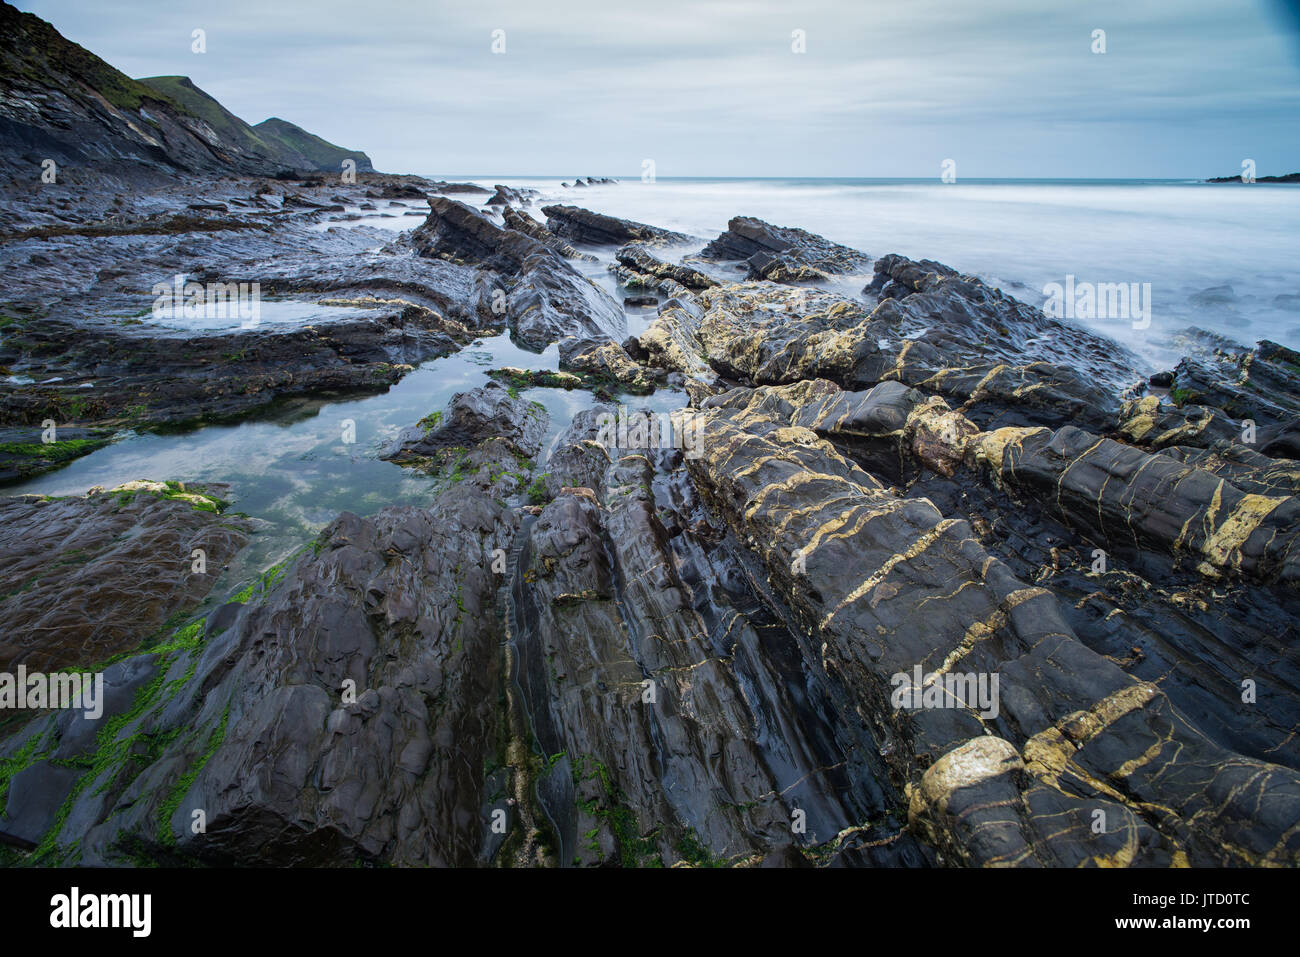 Beach and rock formations at Crackington Haven, Cornwall, England, United Kingdom. Stock Photo